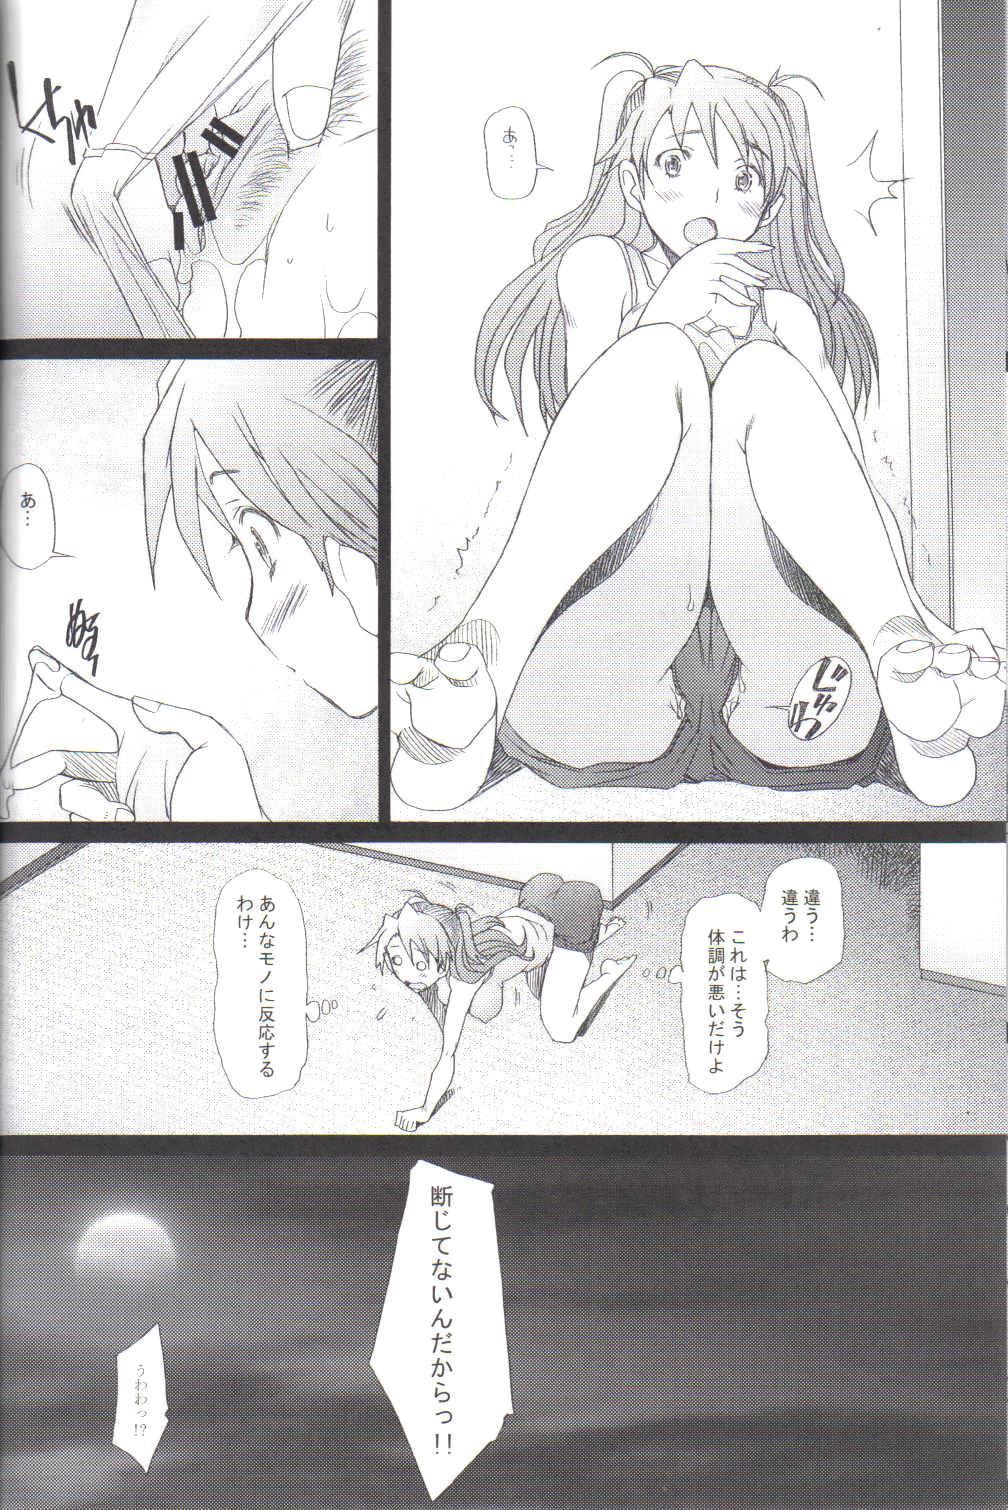 Hard Core Porn Confusion LEVEL A - Neon genesis evangelion Tribbing - Page 6